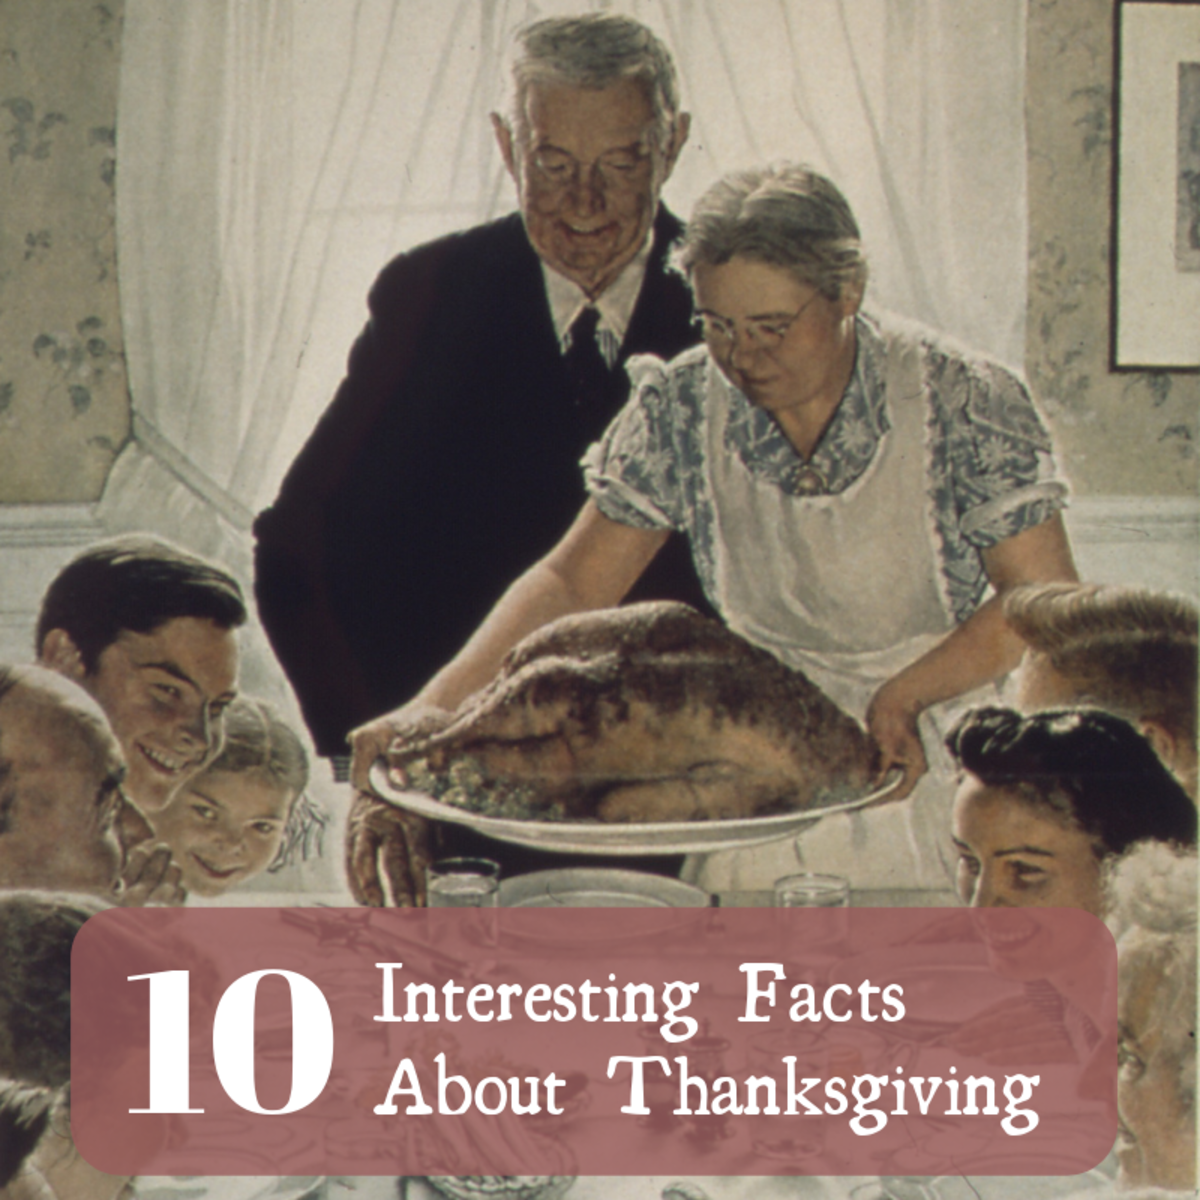 Over the course of its history, Thanksgiving has become associated with a number of unique practices and traditions. 